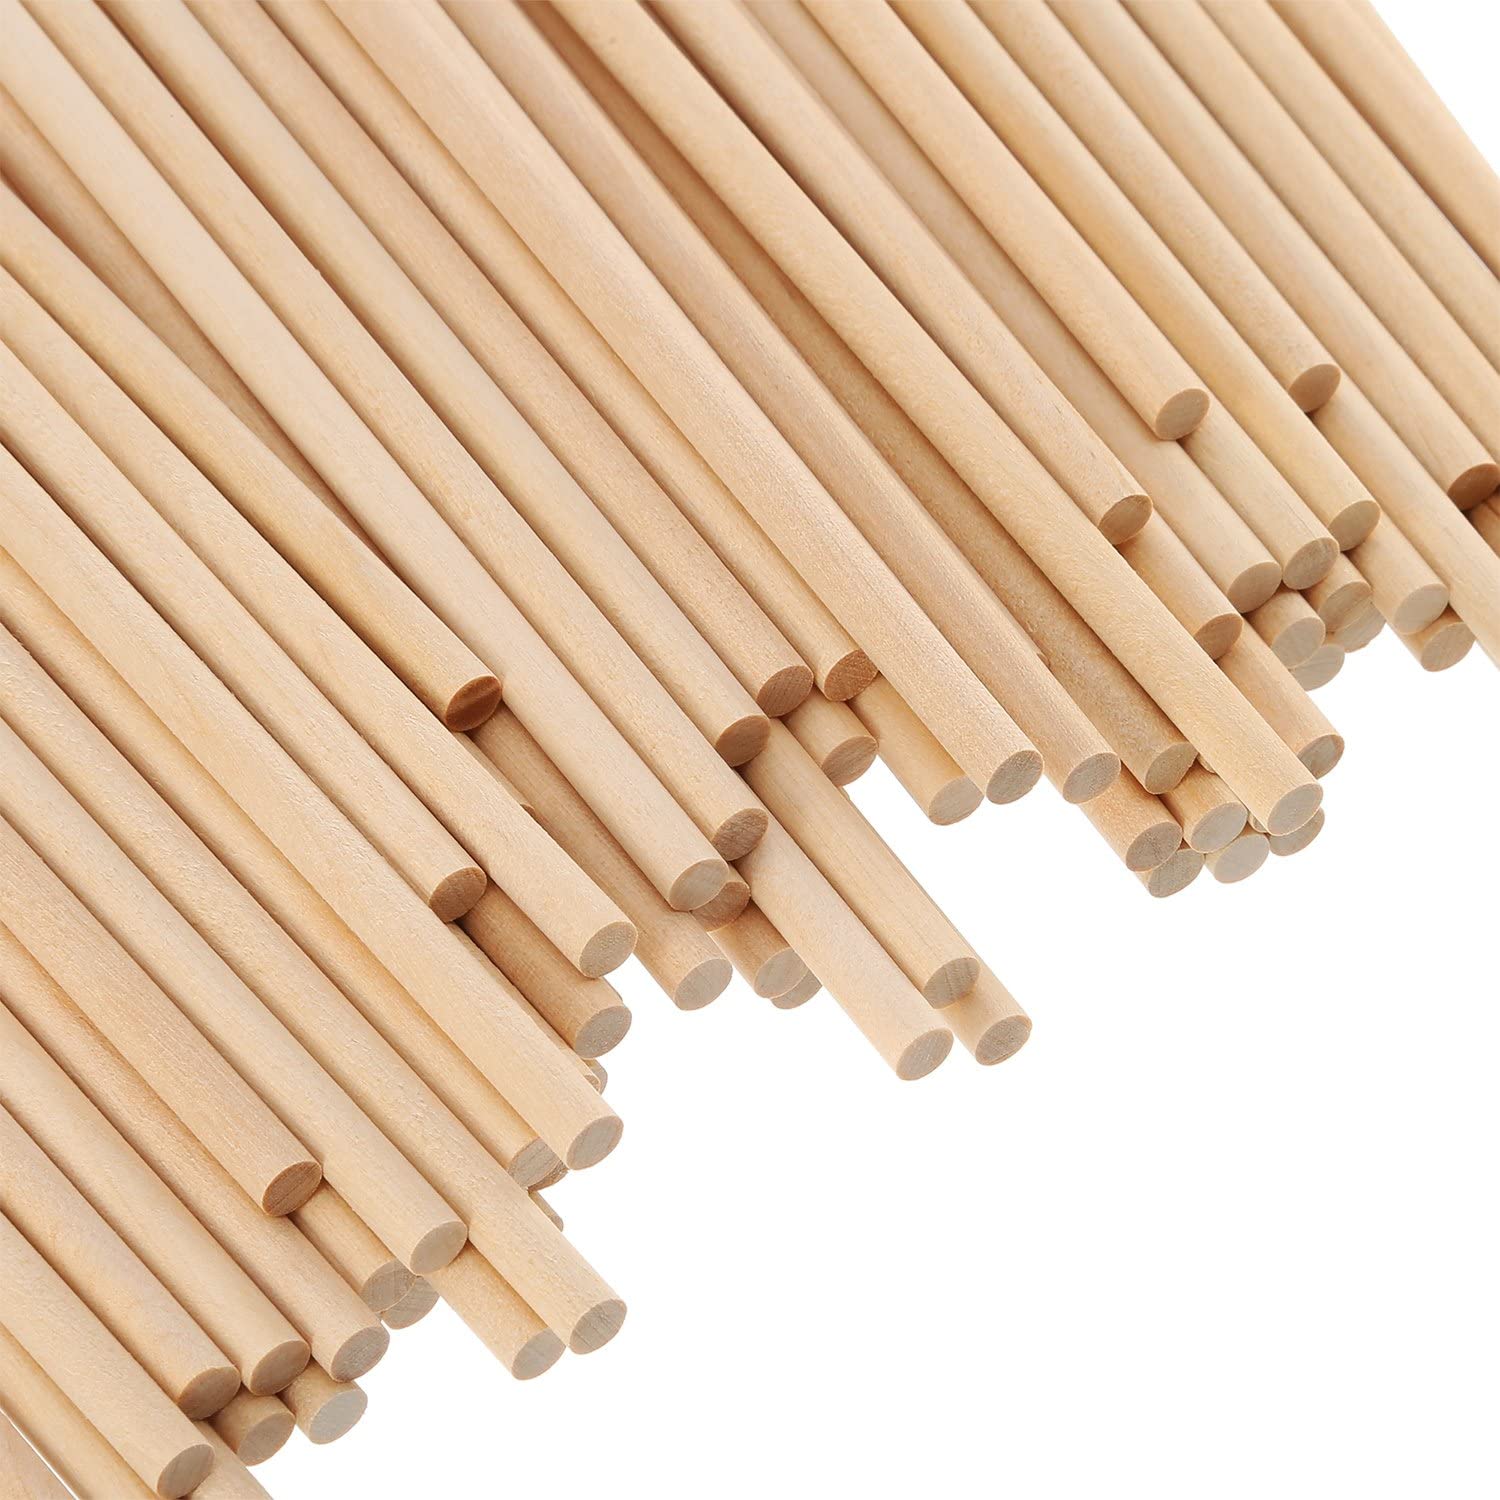 High quality wooden round shape dowel rods and stick (14).jpg